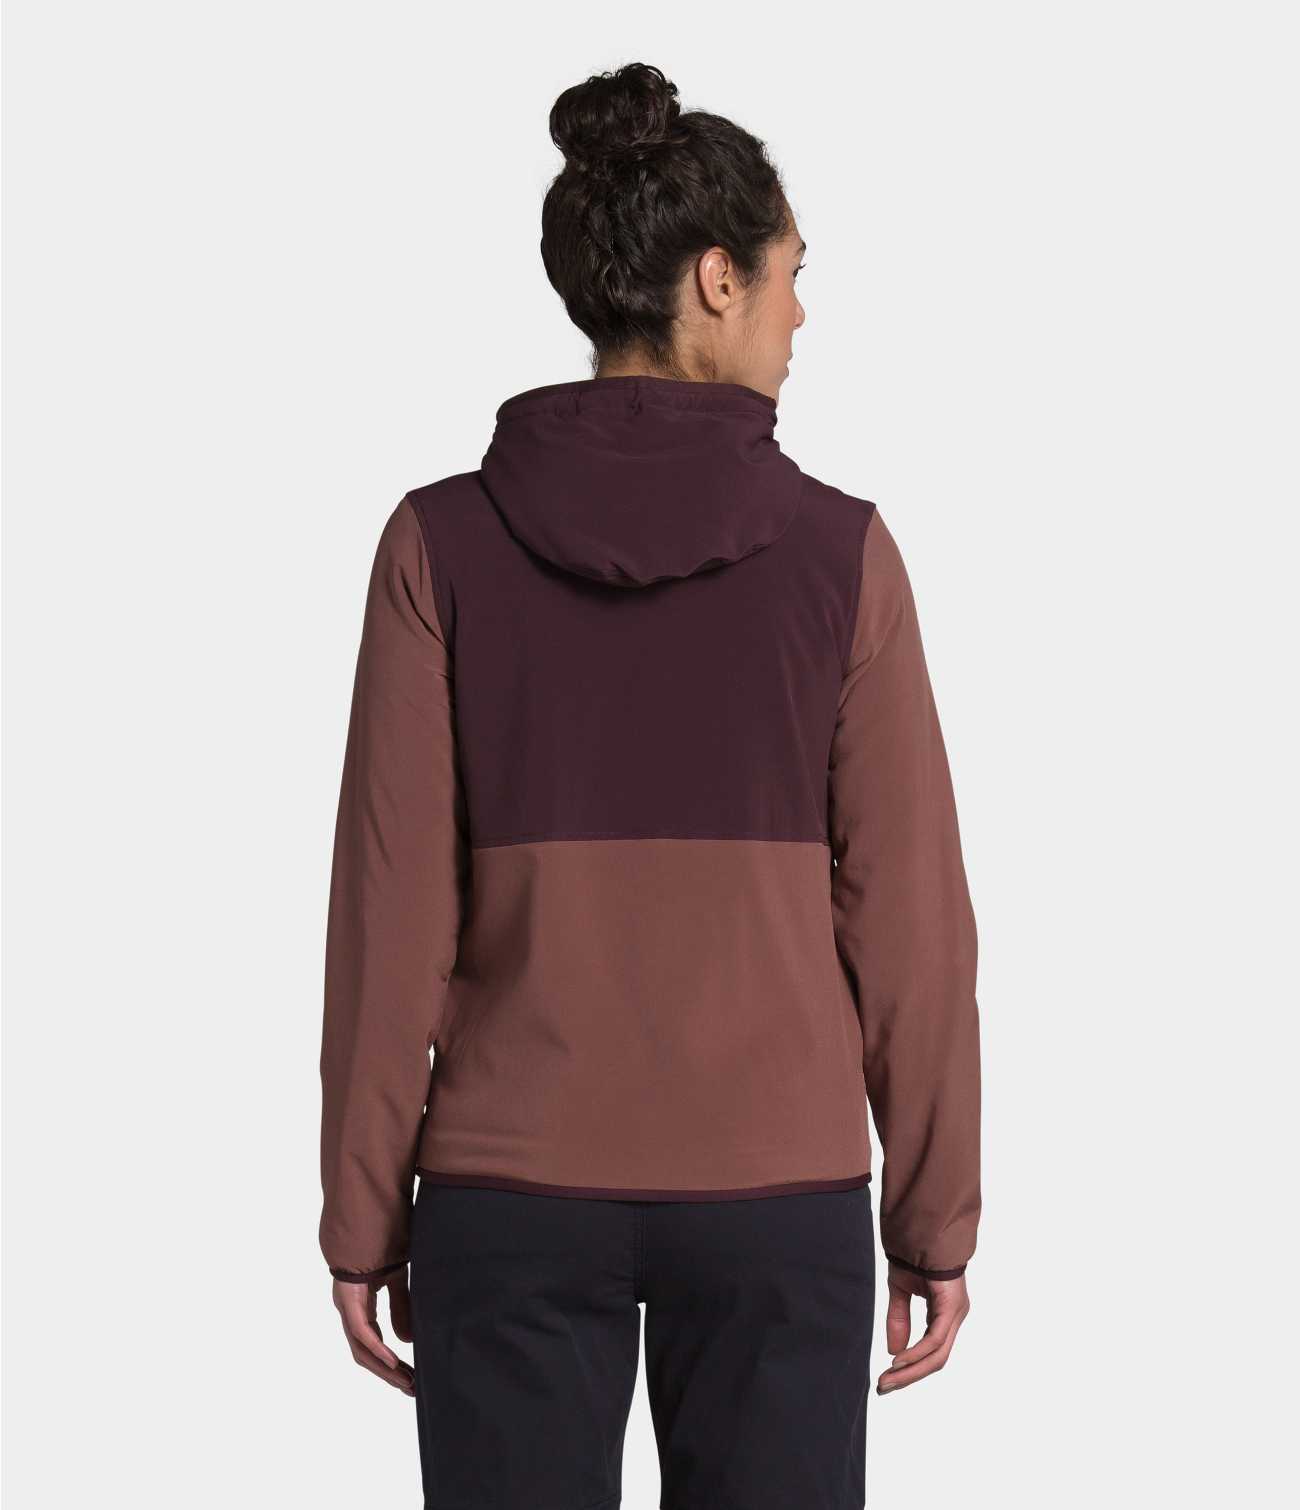 WOMEN'S MOUNTAIN SWEATSHIRT HOODIE 3.0 | The North Face | The